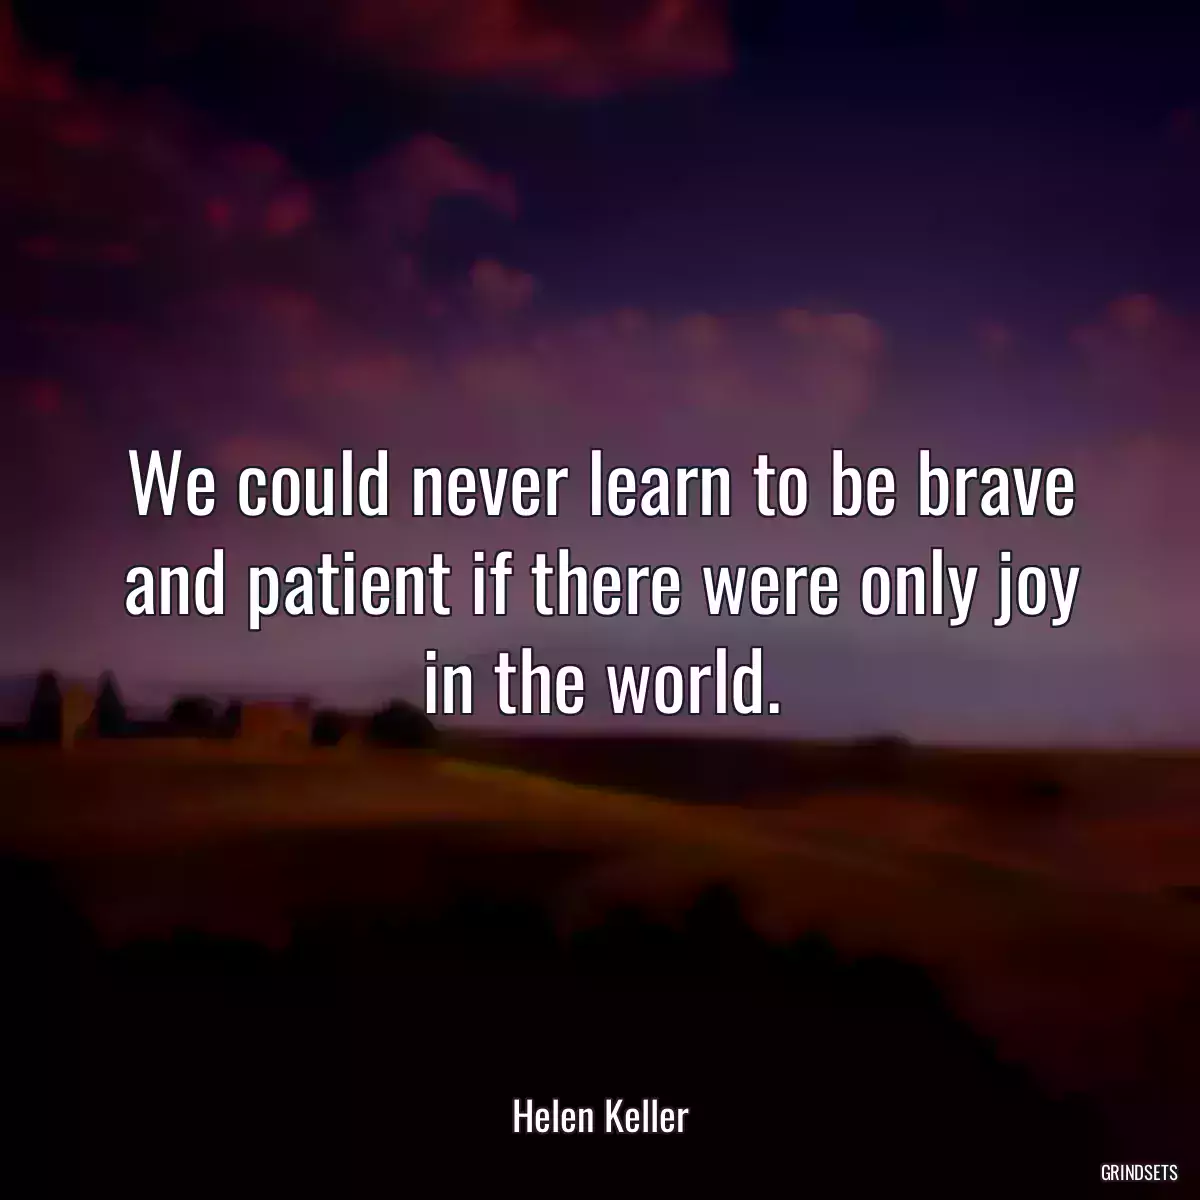 We could never learn to be brave and patient if there were only joy in the world.